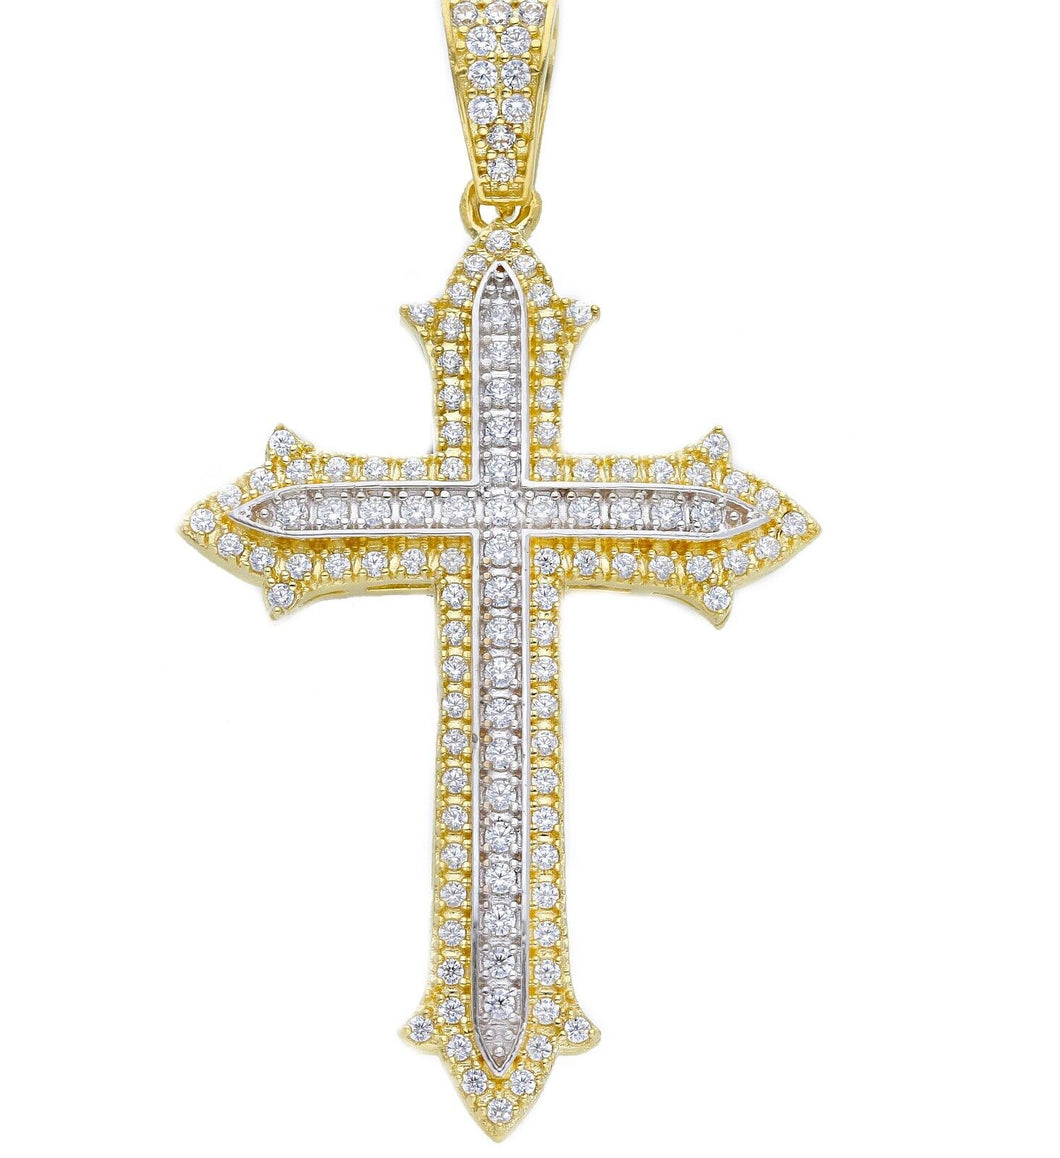 18K YELLOW AND WHITE BIG 35mm GOLD CROSS WITH WHITE ROUND CUBIC ZIRCONIA, SHINY